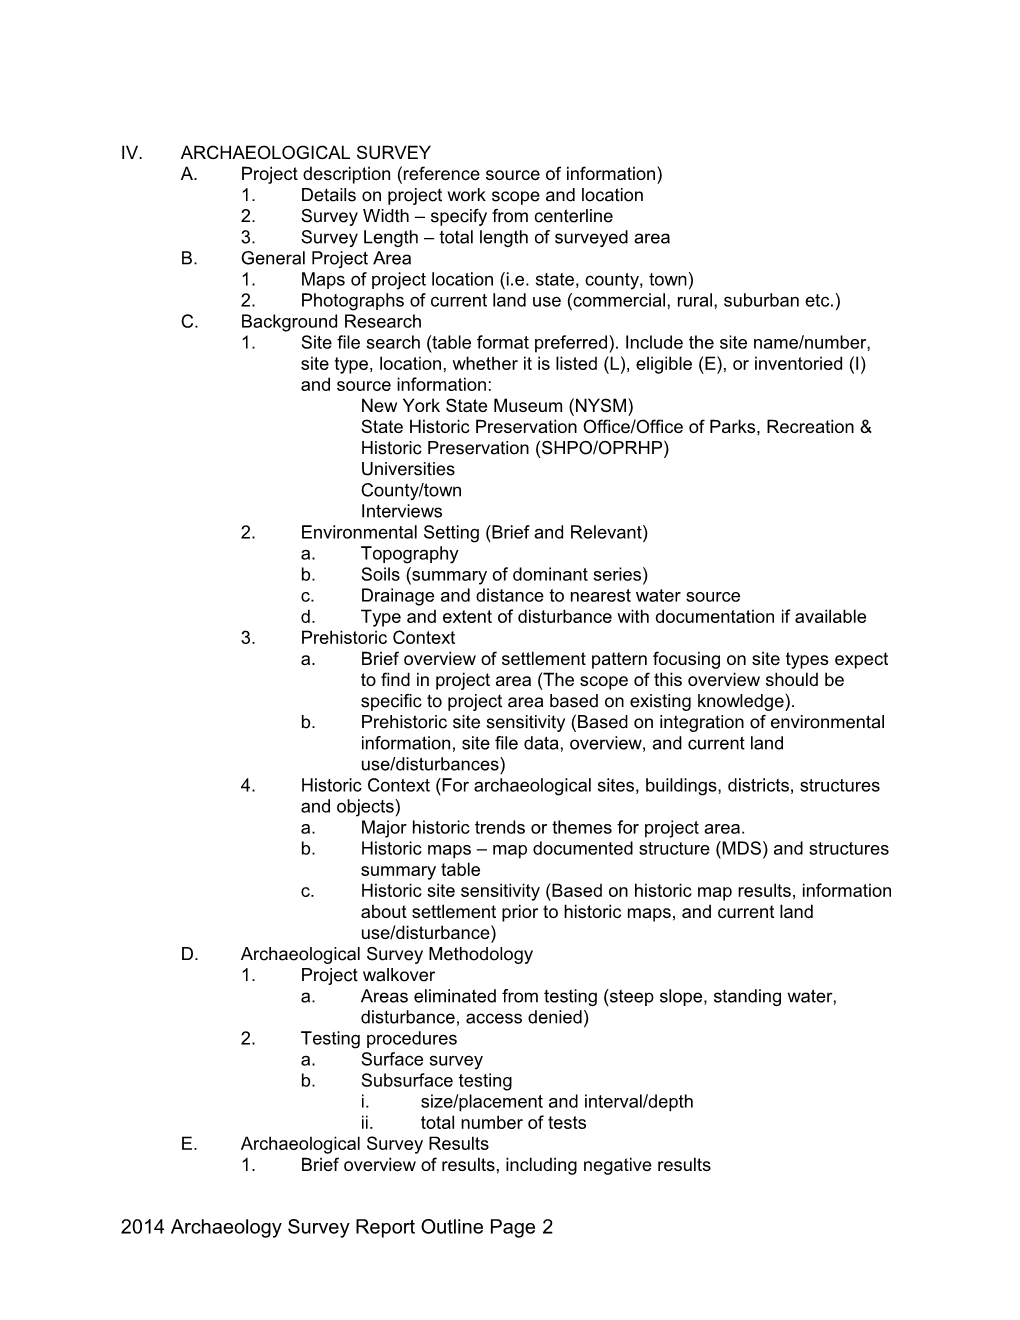 NYSED Reconnaissance (Phase I) Survey Report Format